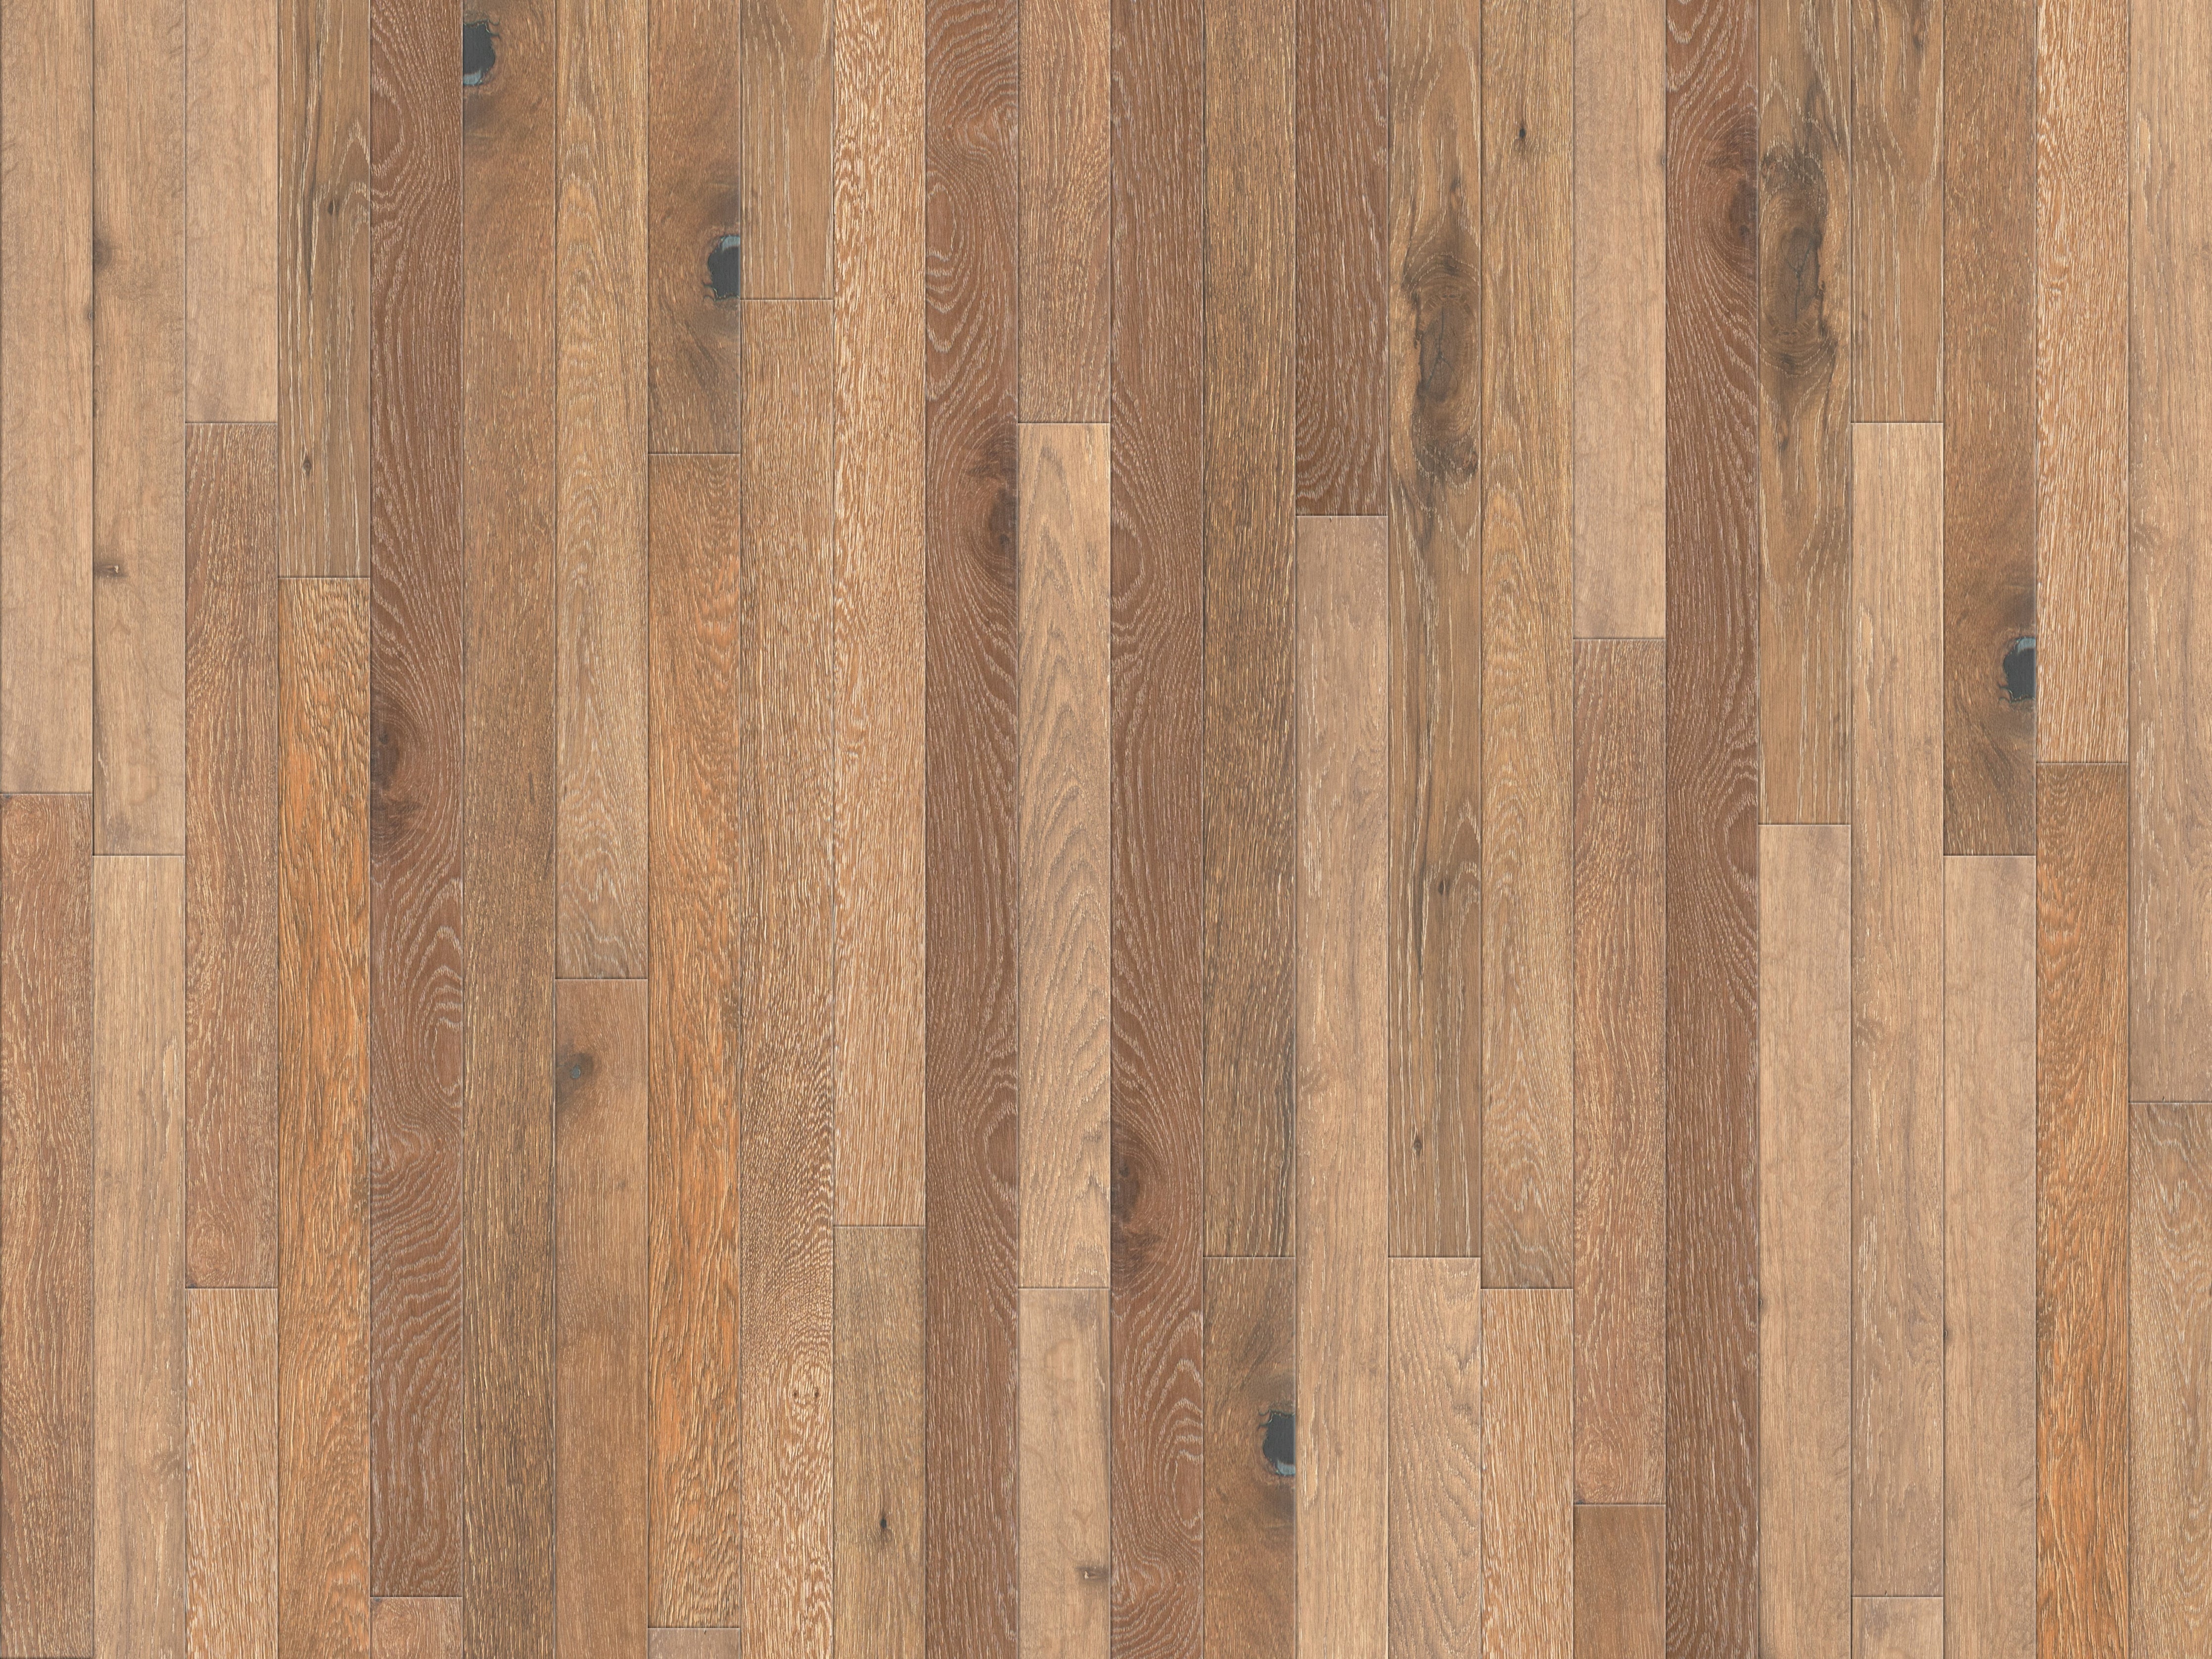 duchateau the guild makerlab edition chisel european oak engineered hardnatural wood floor uv lacquer finish for interior use distributed by surface group international